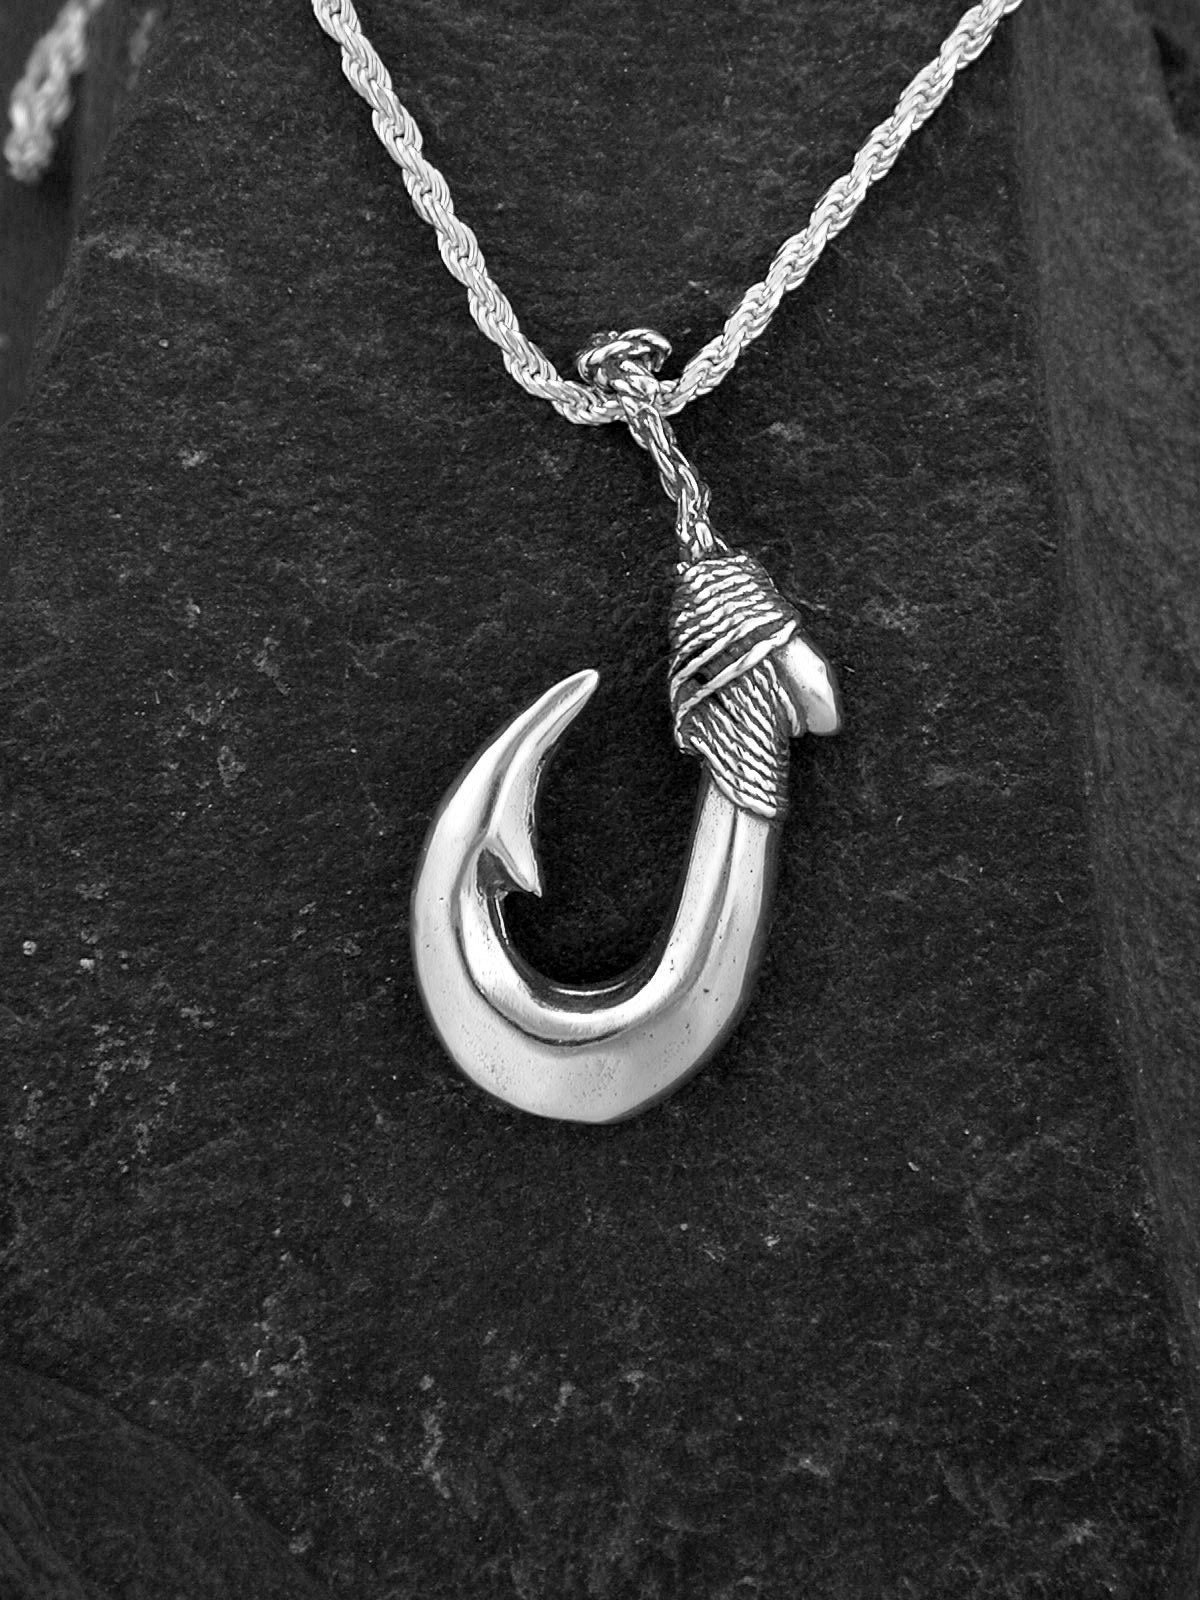 Sterling Silver Large Hawaiian Fish Hook Pendant on a Sterling Silver Chain  -  Australia